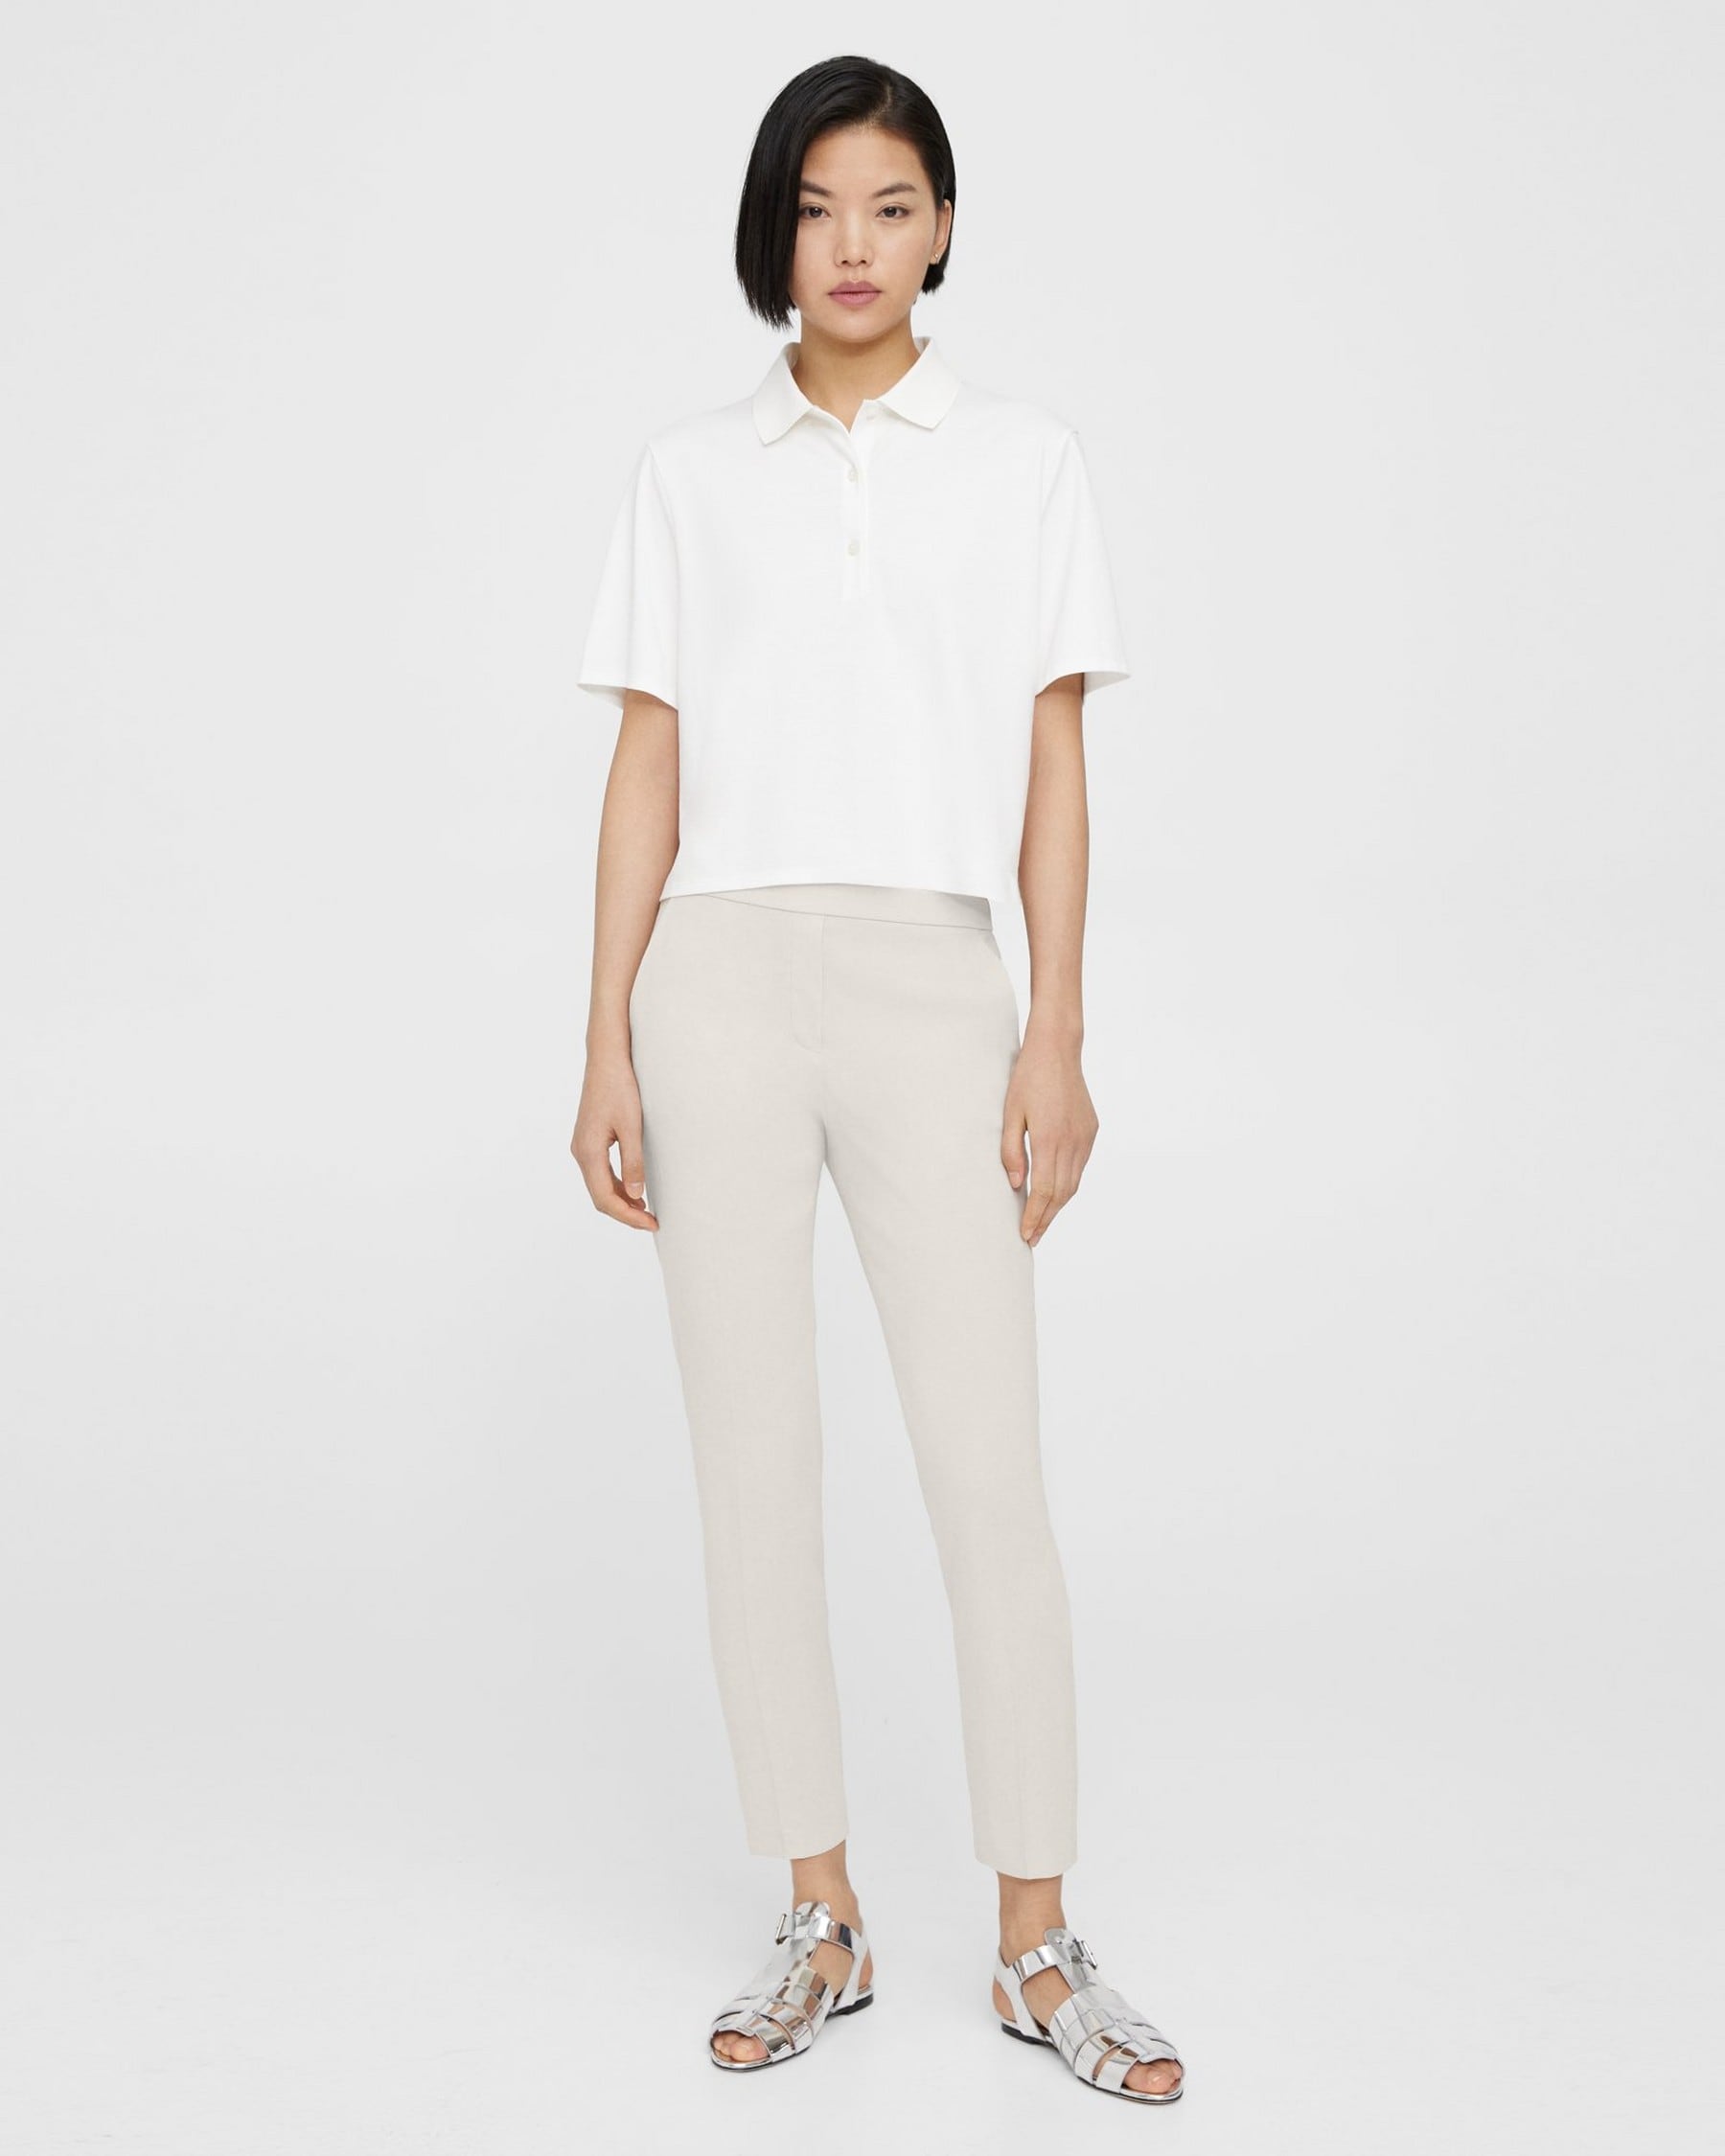 theory.com | Treeca Pull-On Pant in Good Linen